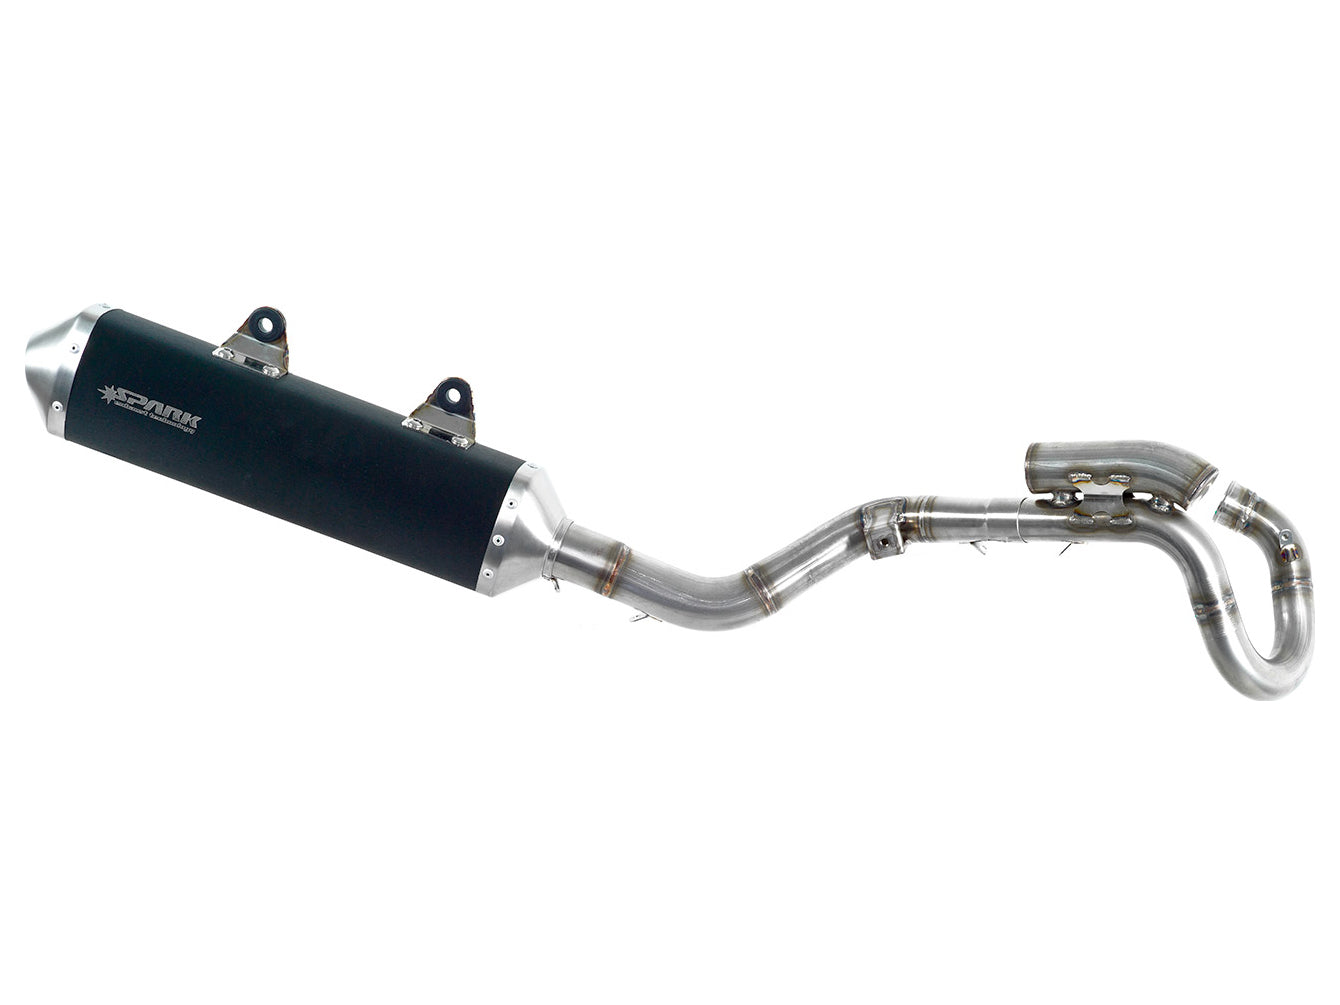 SPARK GKT8001 KTM SX-F 250 (11/12) Full Exhaust System "Off Road" (racing)